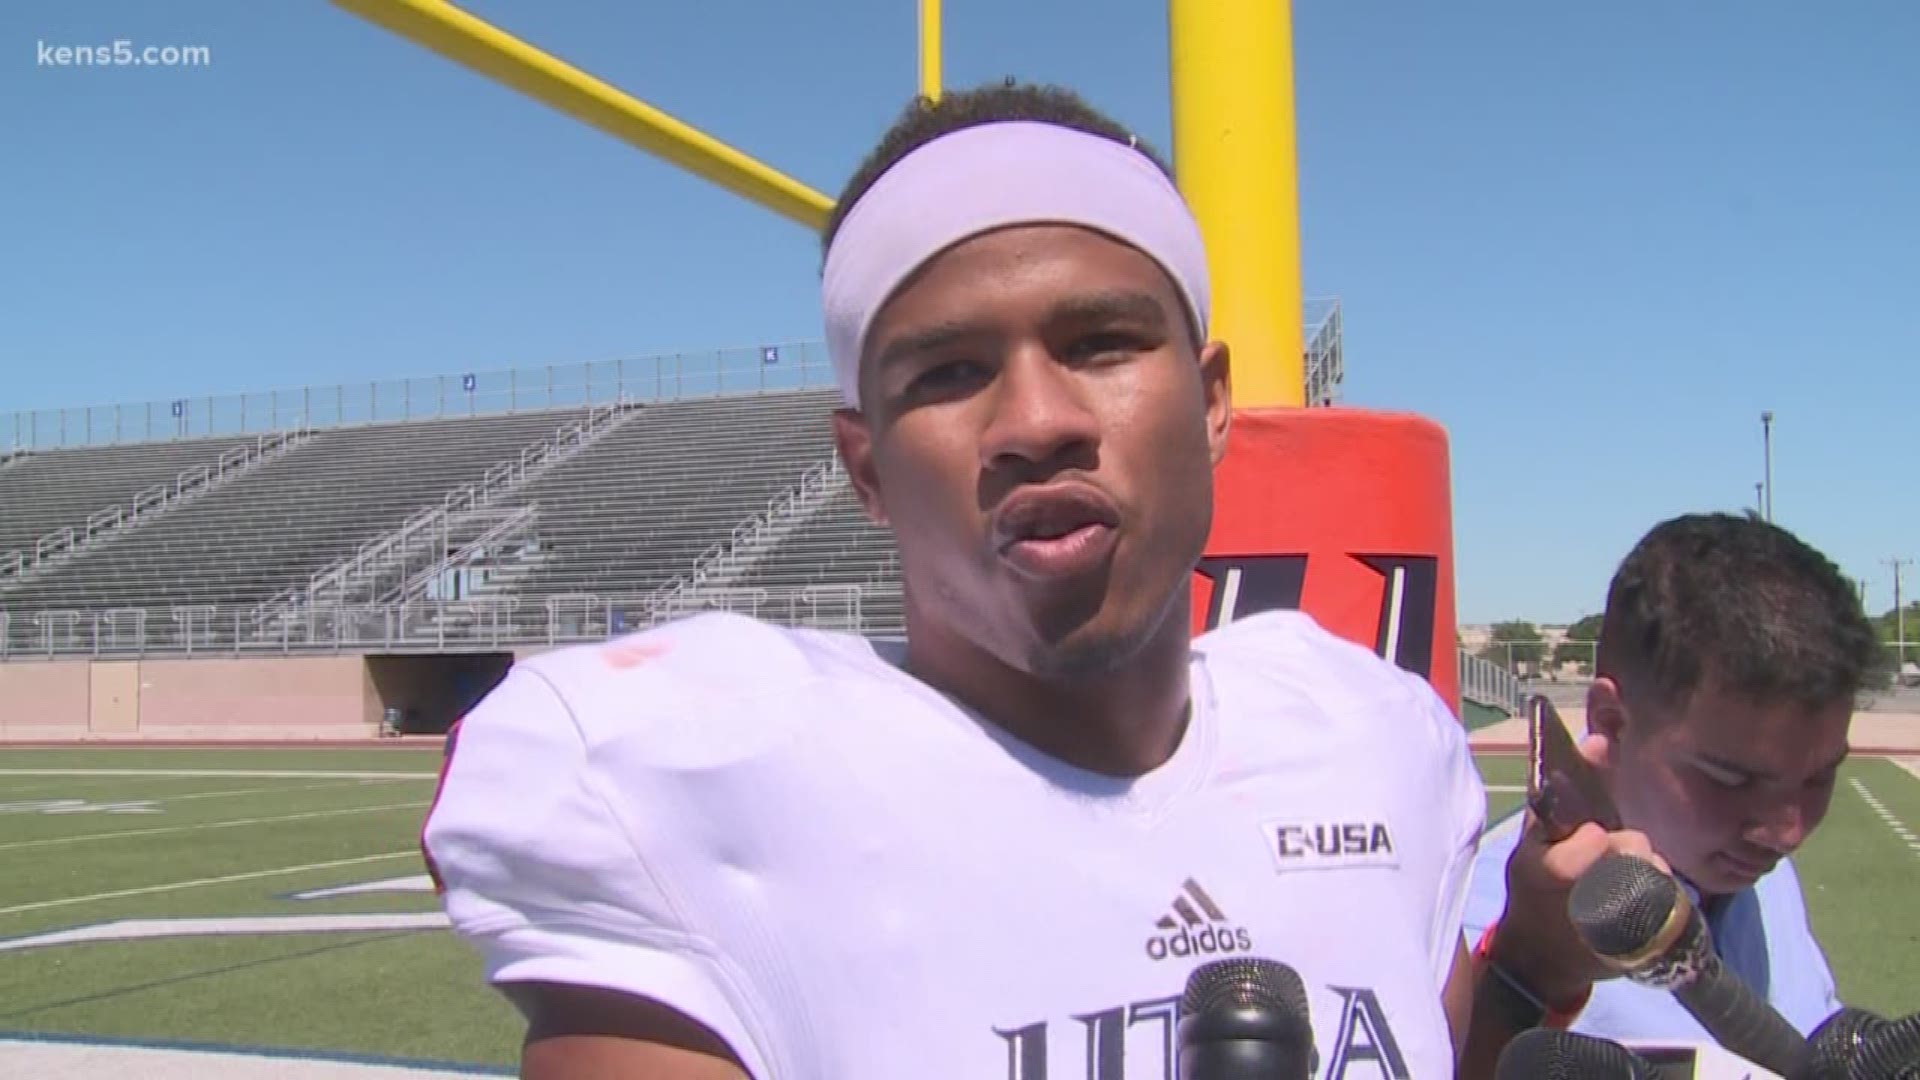 Frank Harris turned the heads of both his coaches and teammates with an exciting showcase at the Roadrunners' spring scrimmage.